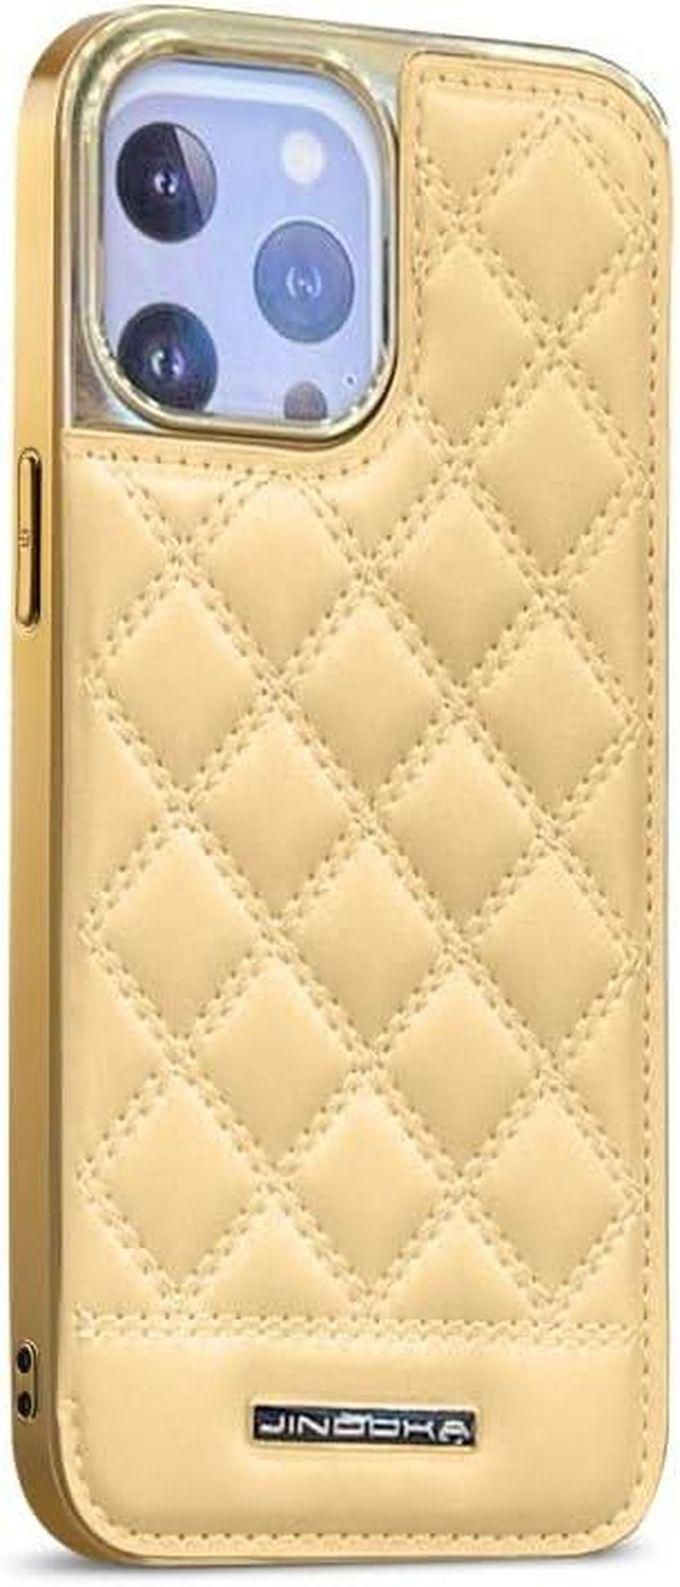 Next store Compatible with iPhone 14 Pro Case, (2/1 Kickstand & Card Holder) Embroidery Diamond Pattern Shockproof Heavy Duty Protective Phone Case for iPhone 14 Pro 6.1 Inch (Camel)